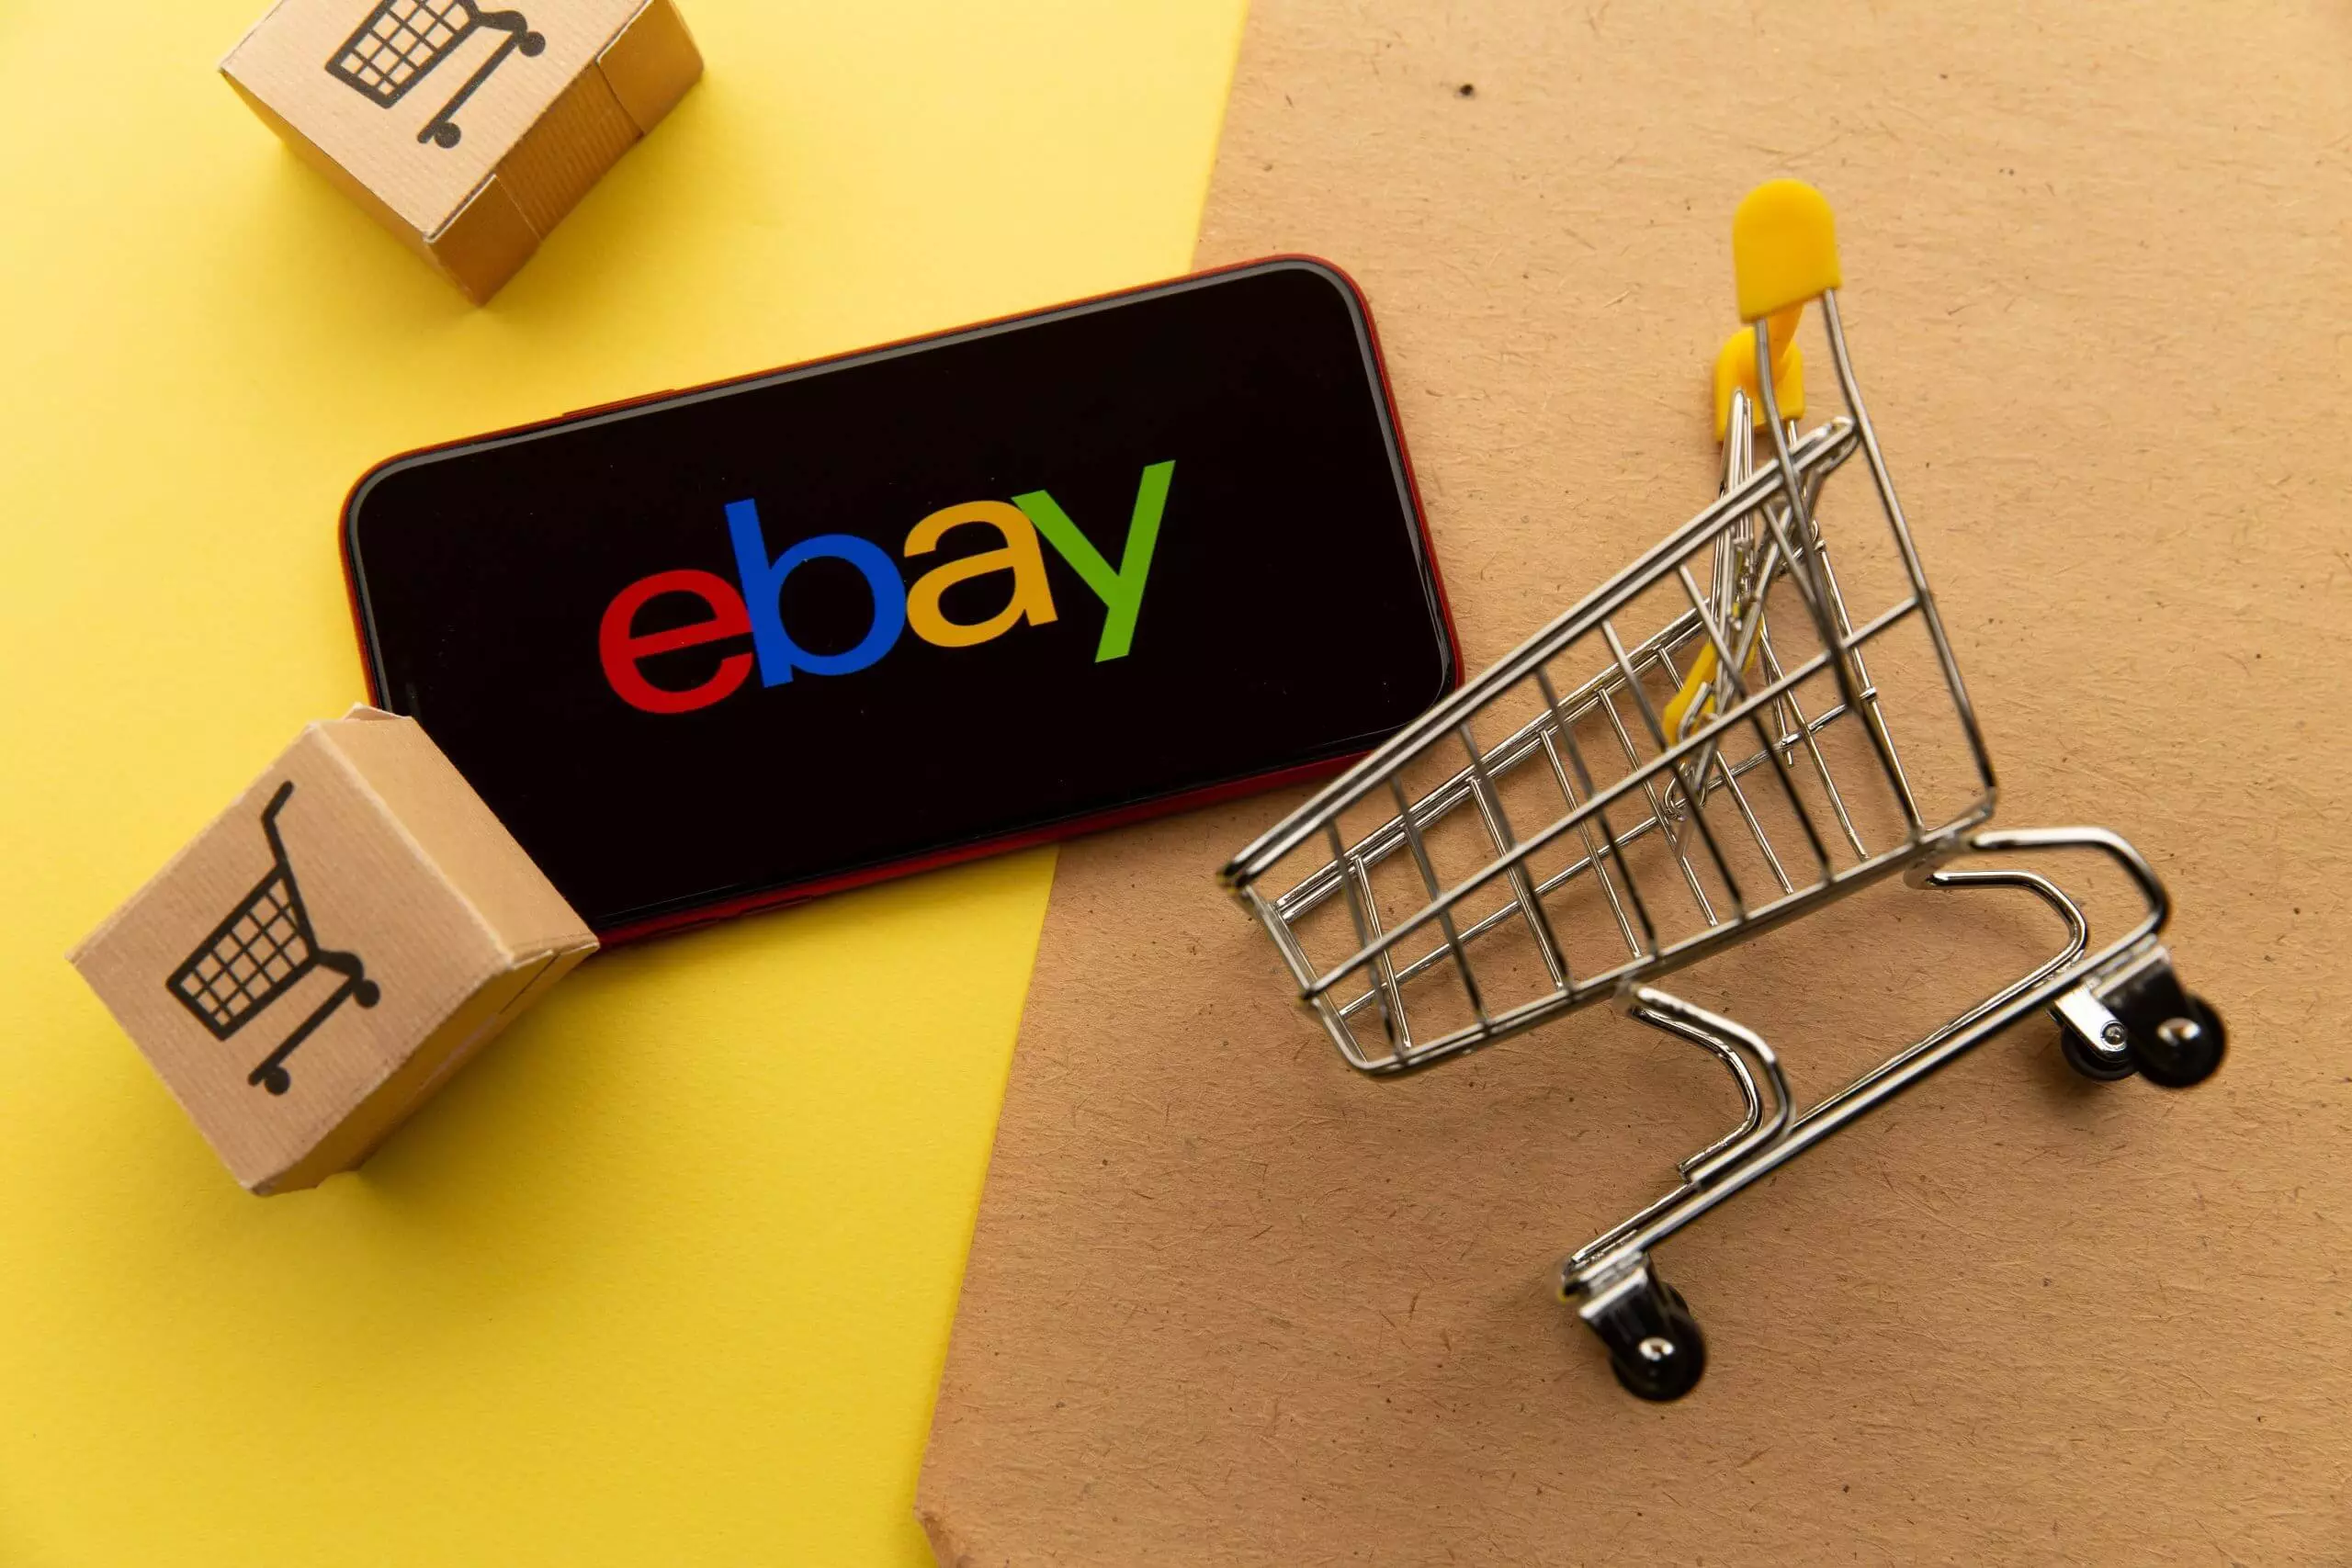 How to automate selling on eBay